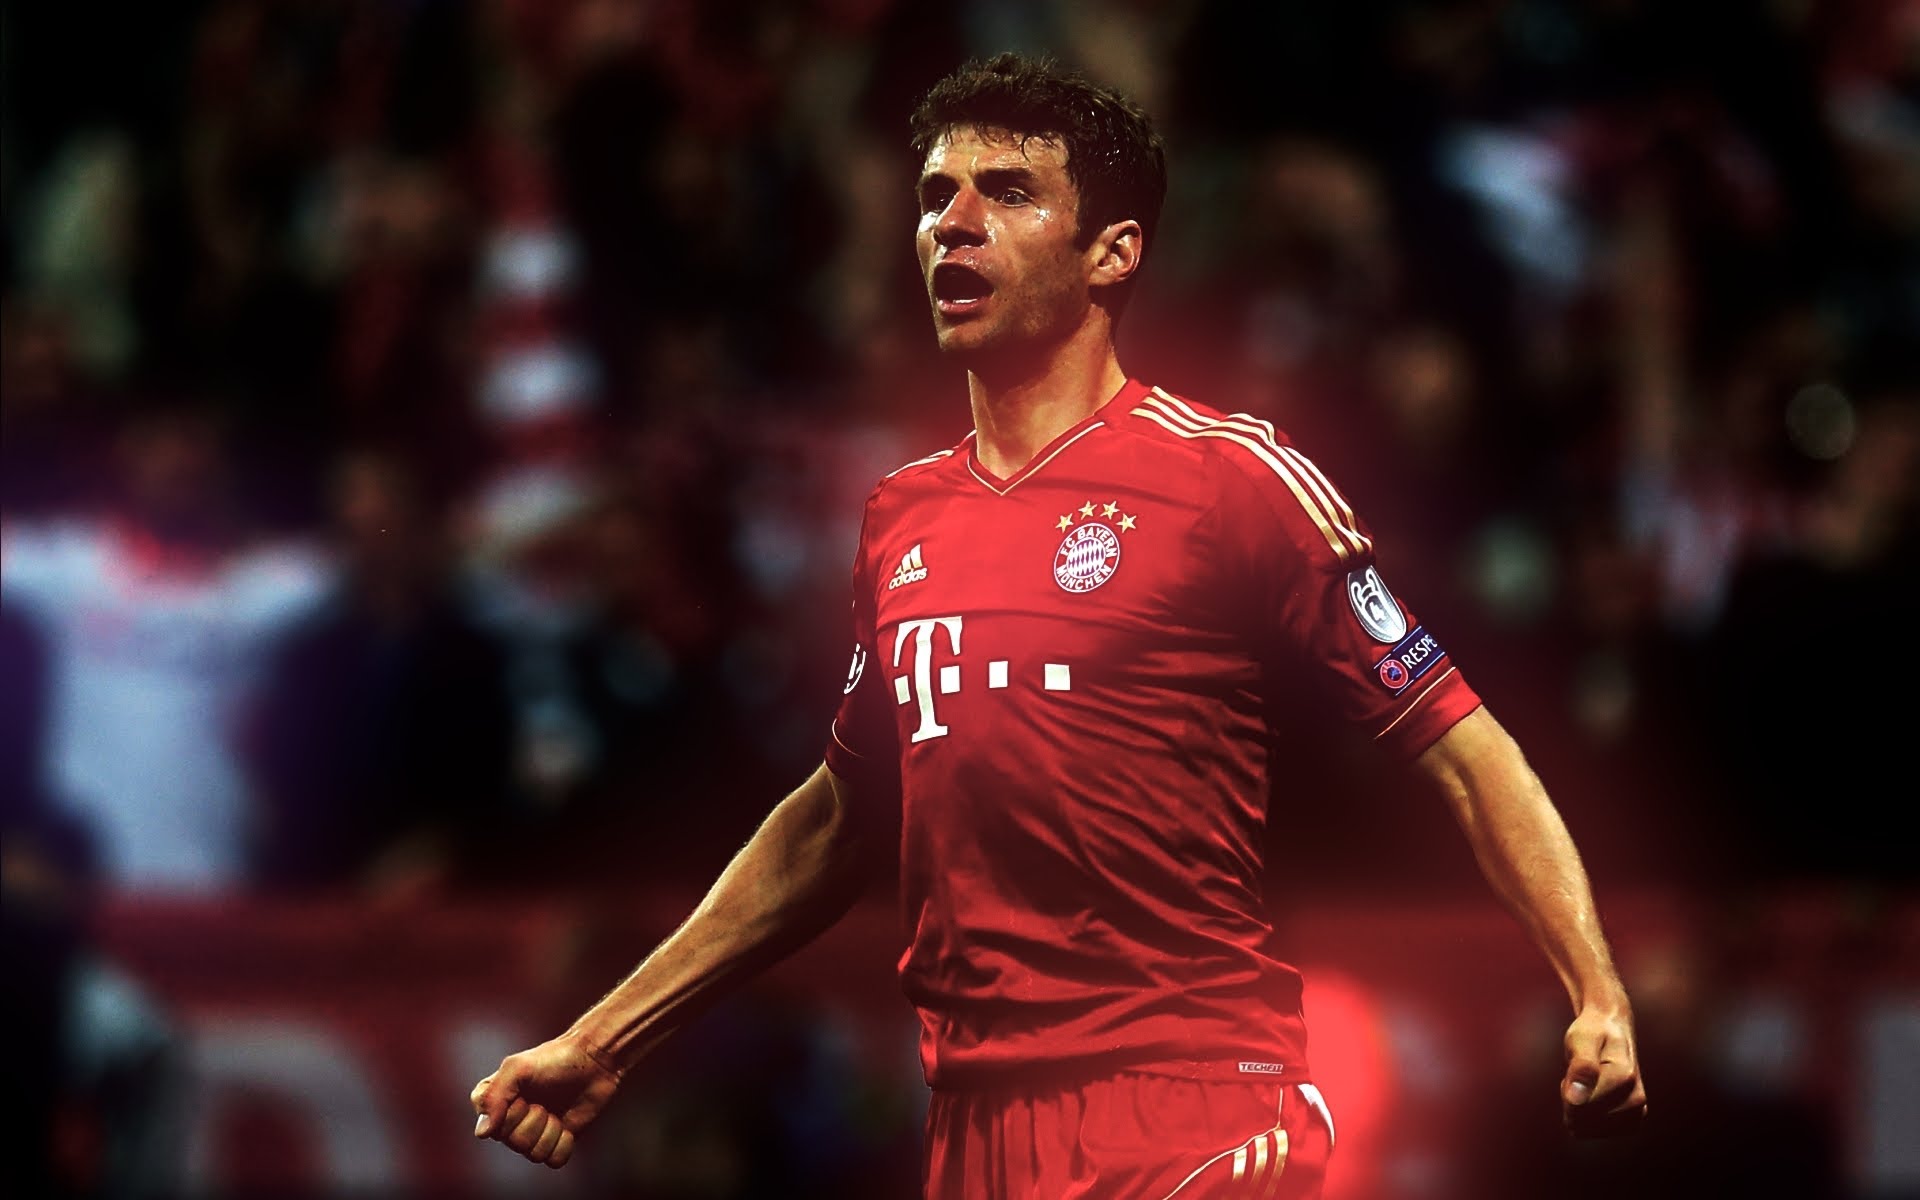 Free Download Thomas Muller Wallpapers High Resolution And Quality Download 1920x1200 For Your Desktop Mobile Tablet Explore 95 Thomas Muller Wallpapers Thomas Muller Wallpapers Thomas Wallpaper Thomas Kincade Wallpapers